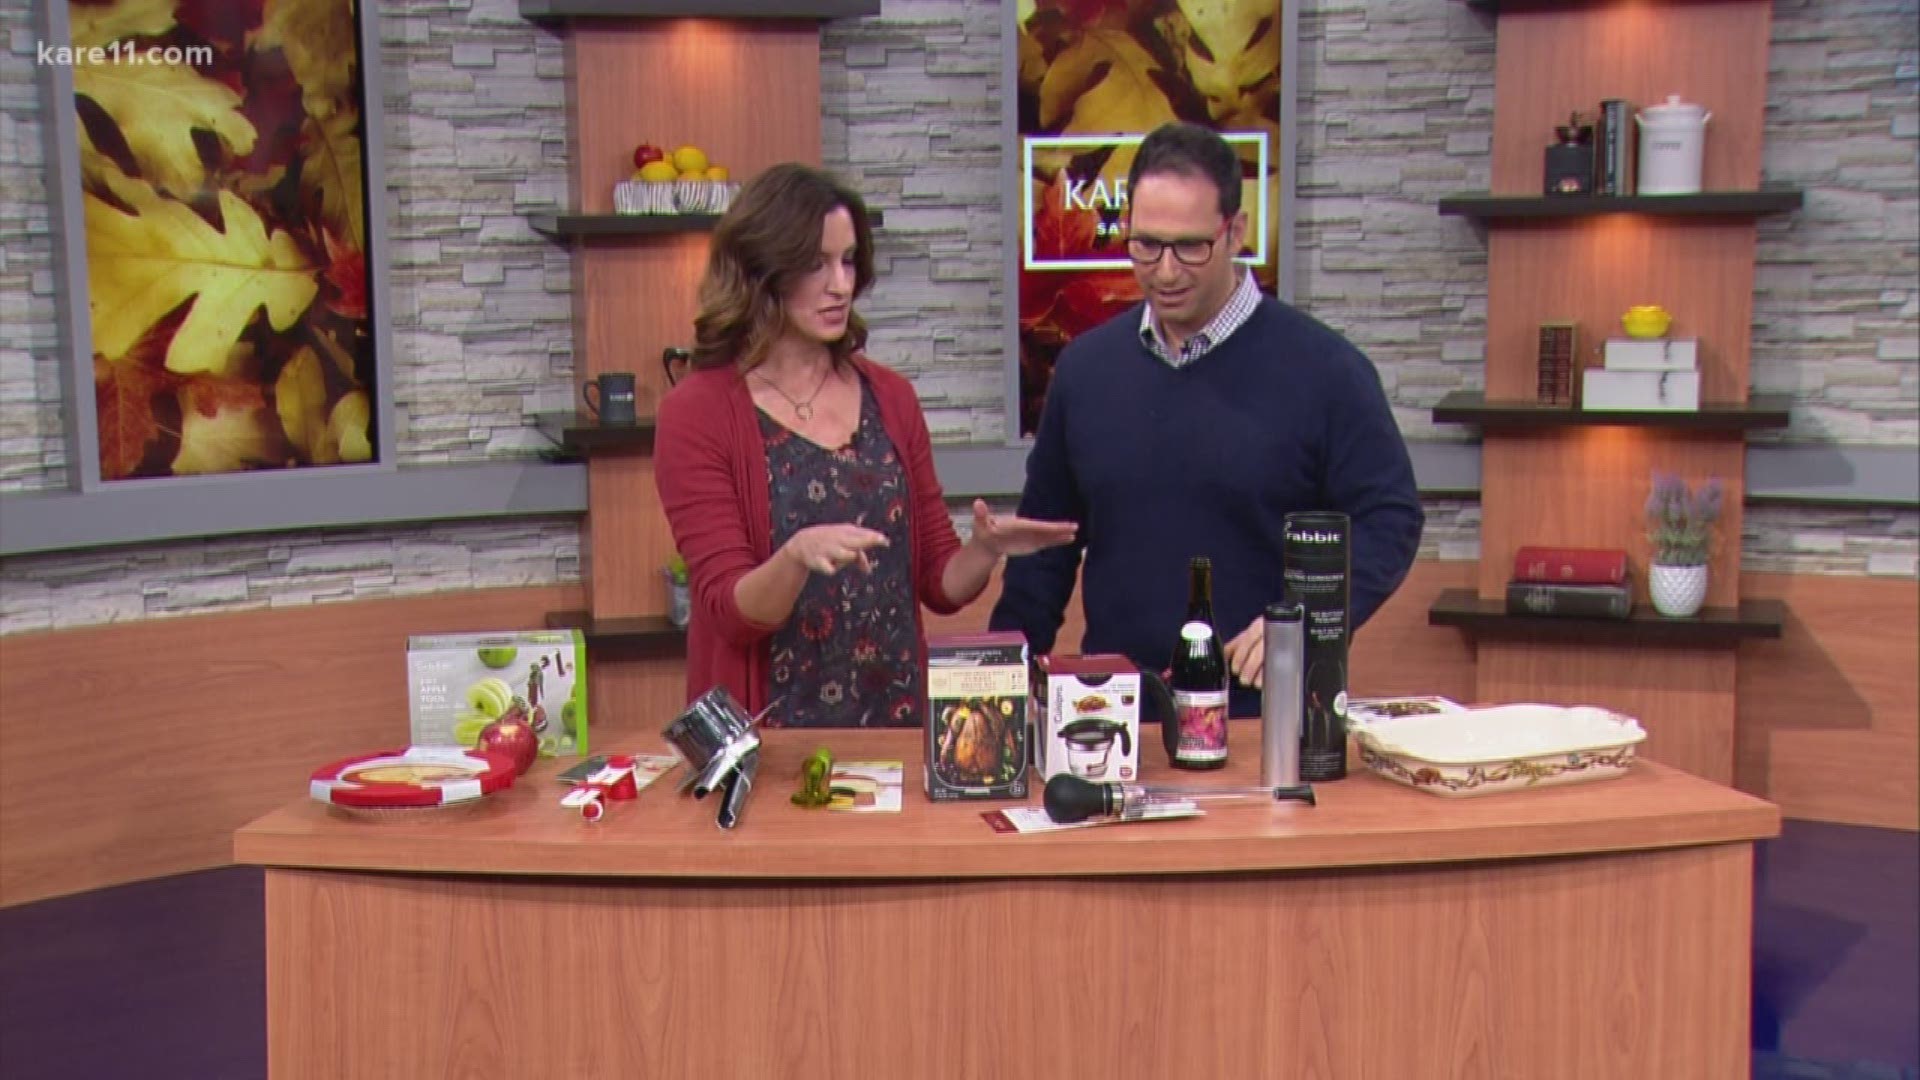 Holiday meal preparations can be time-consuming, but with the right tools, you can cut down time in the kitchen. Explore Edina's Shelly Loberg joined KARE 11 Saturday to show off some kitchen gadgets that can make Thanksgiving dinner a cinch.